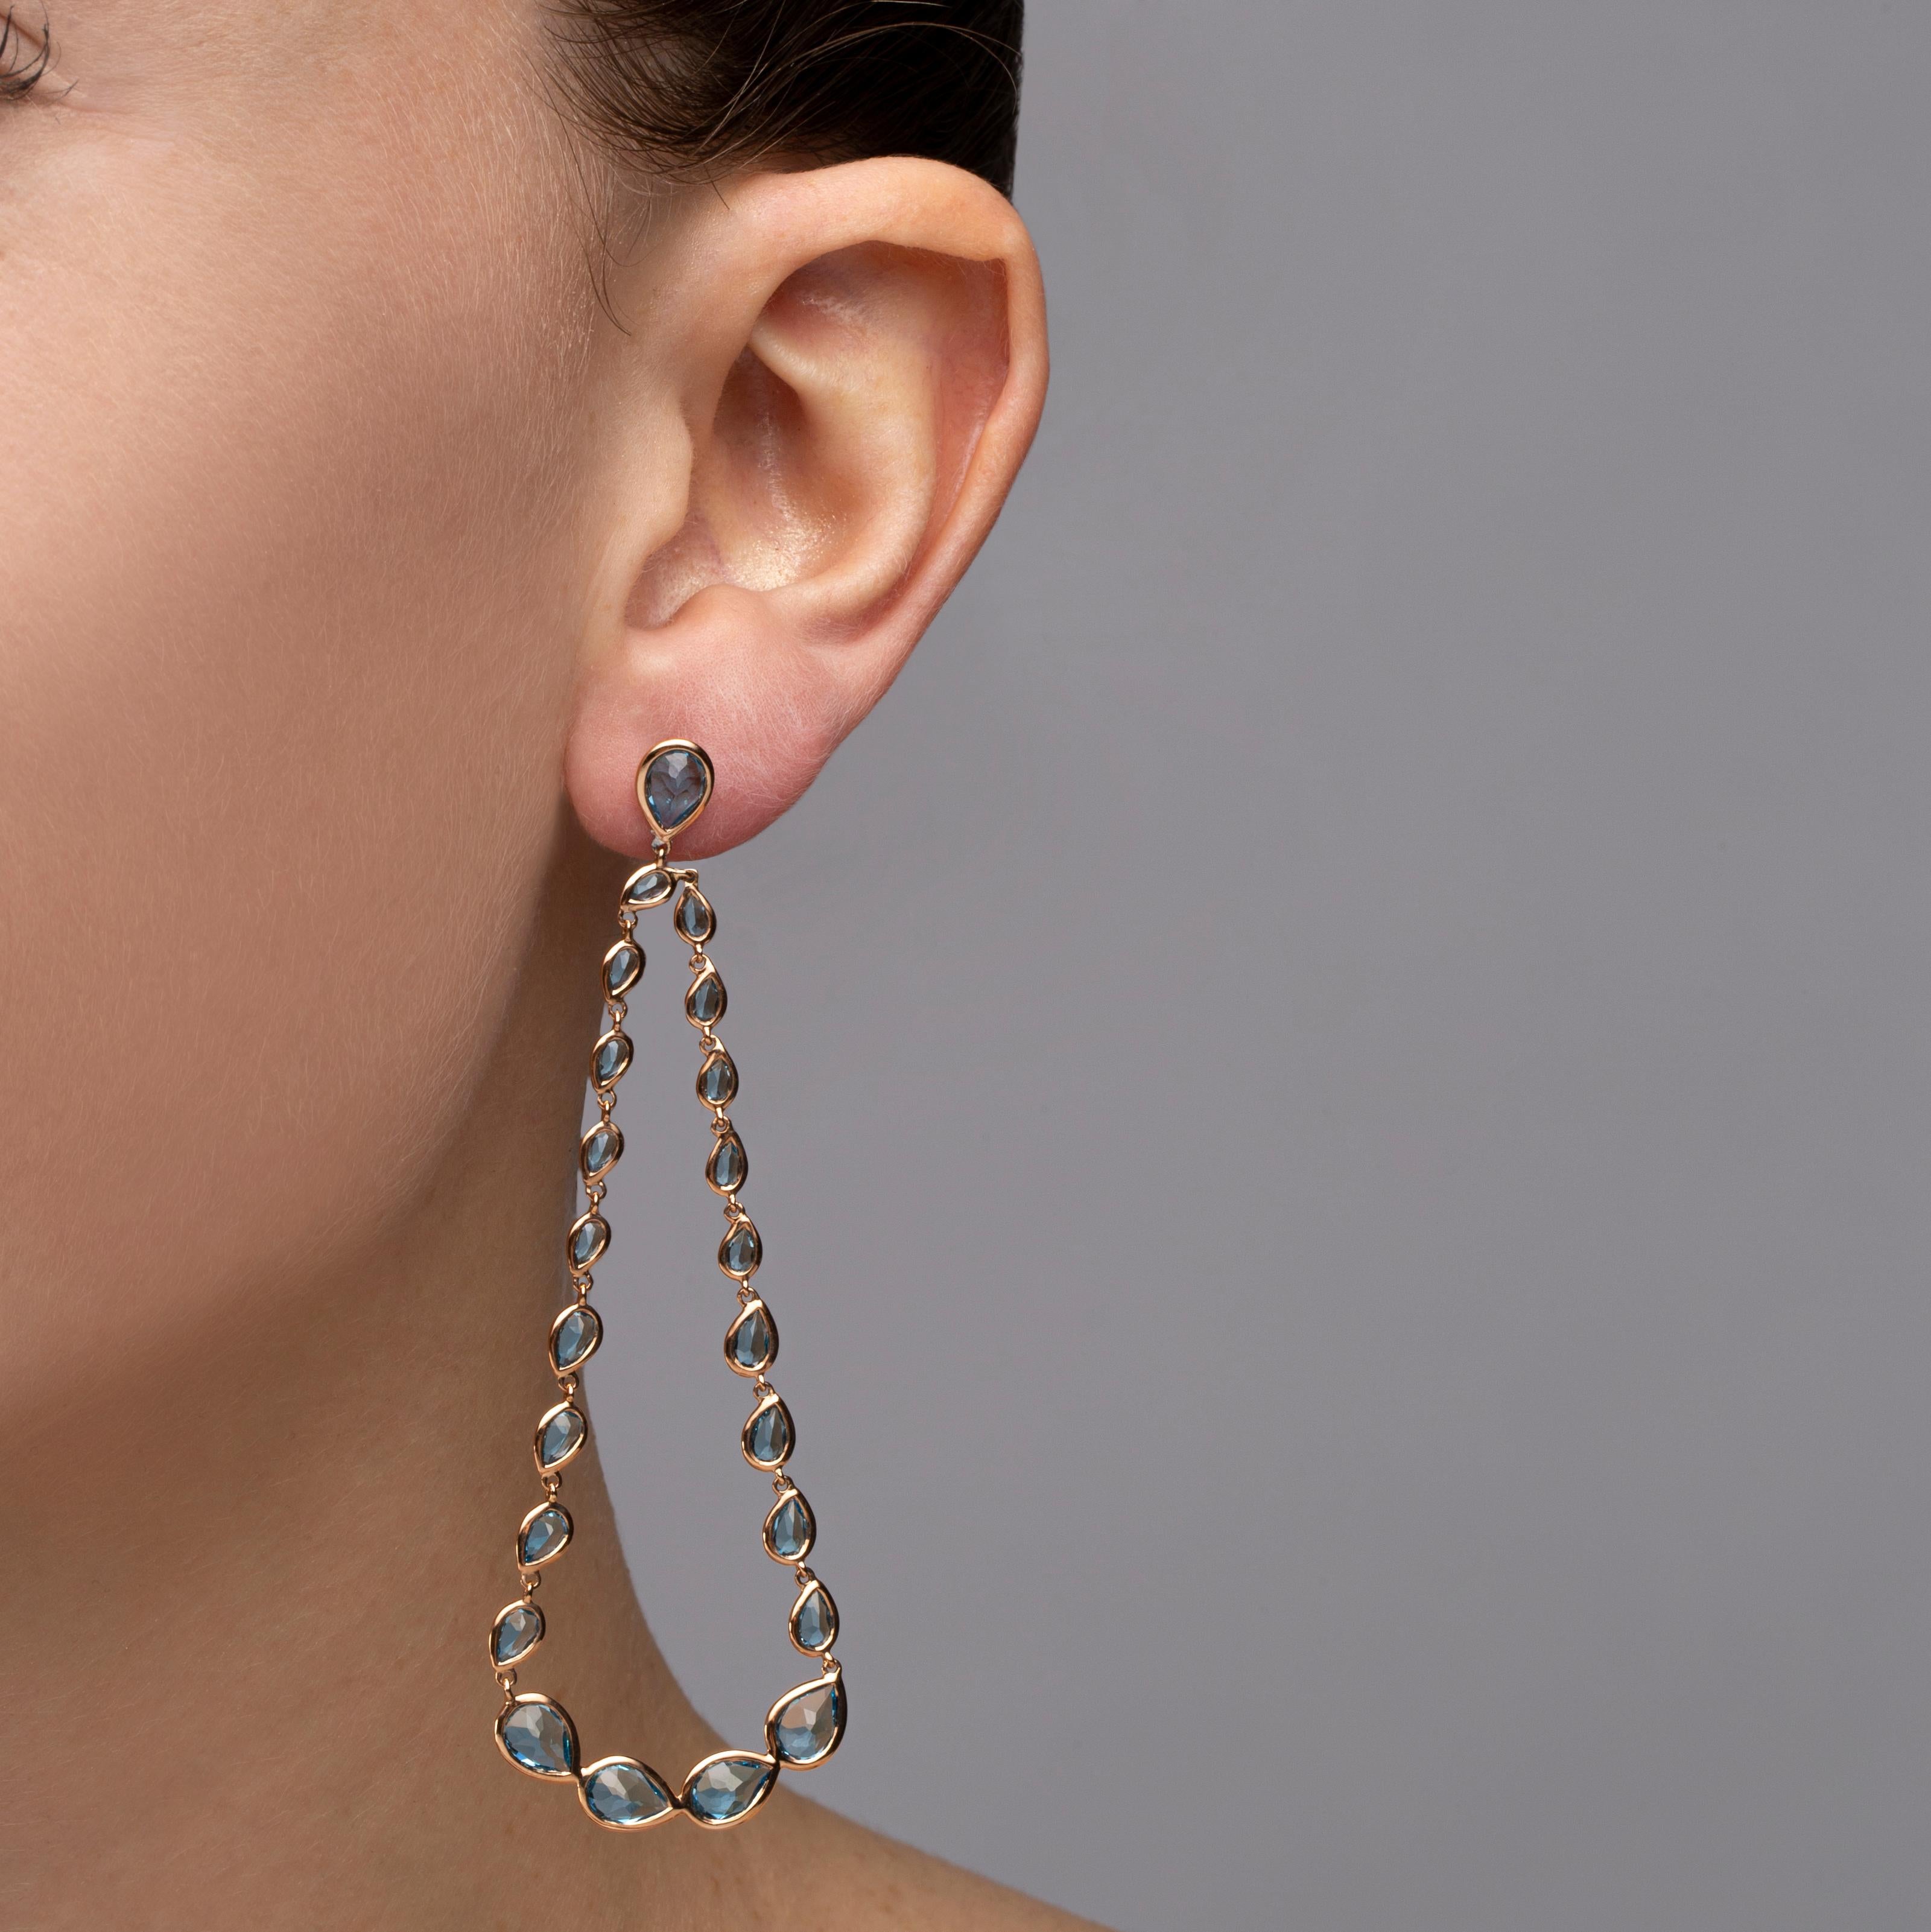 Alex Jona design collection, hand crafted in Italy, pair of 18K rose gold dangle earrings completely articulated, featuring 13.59 carats of rose cut blue topaz drops.

Alex Jona jewels stand out, not only for their special design and for the